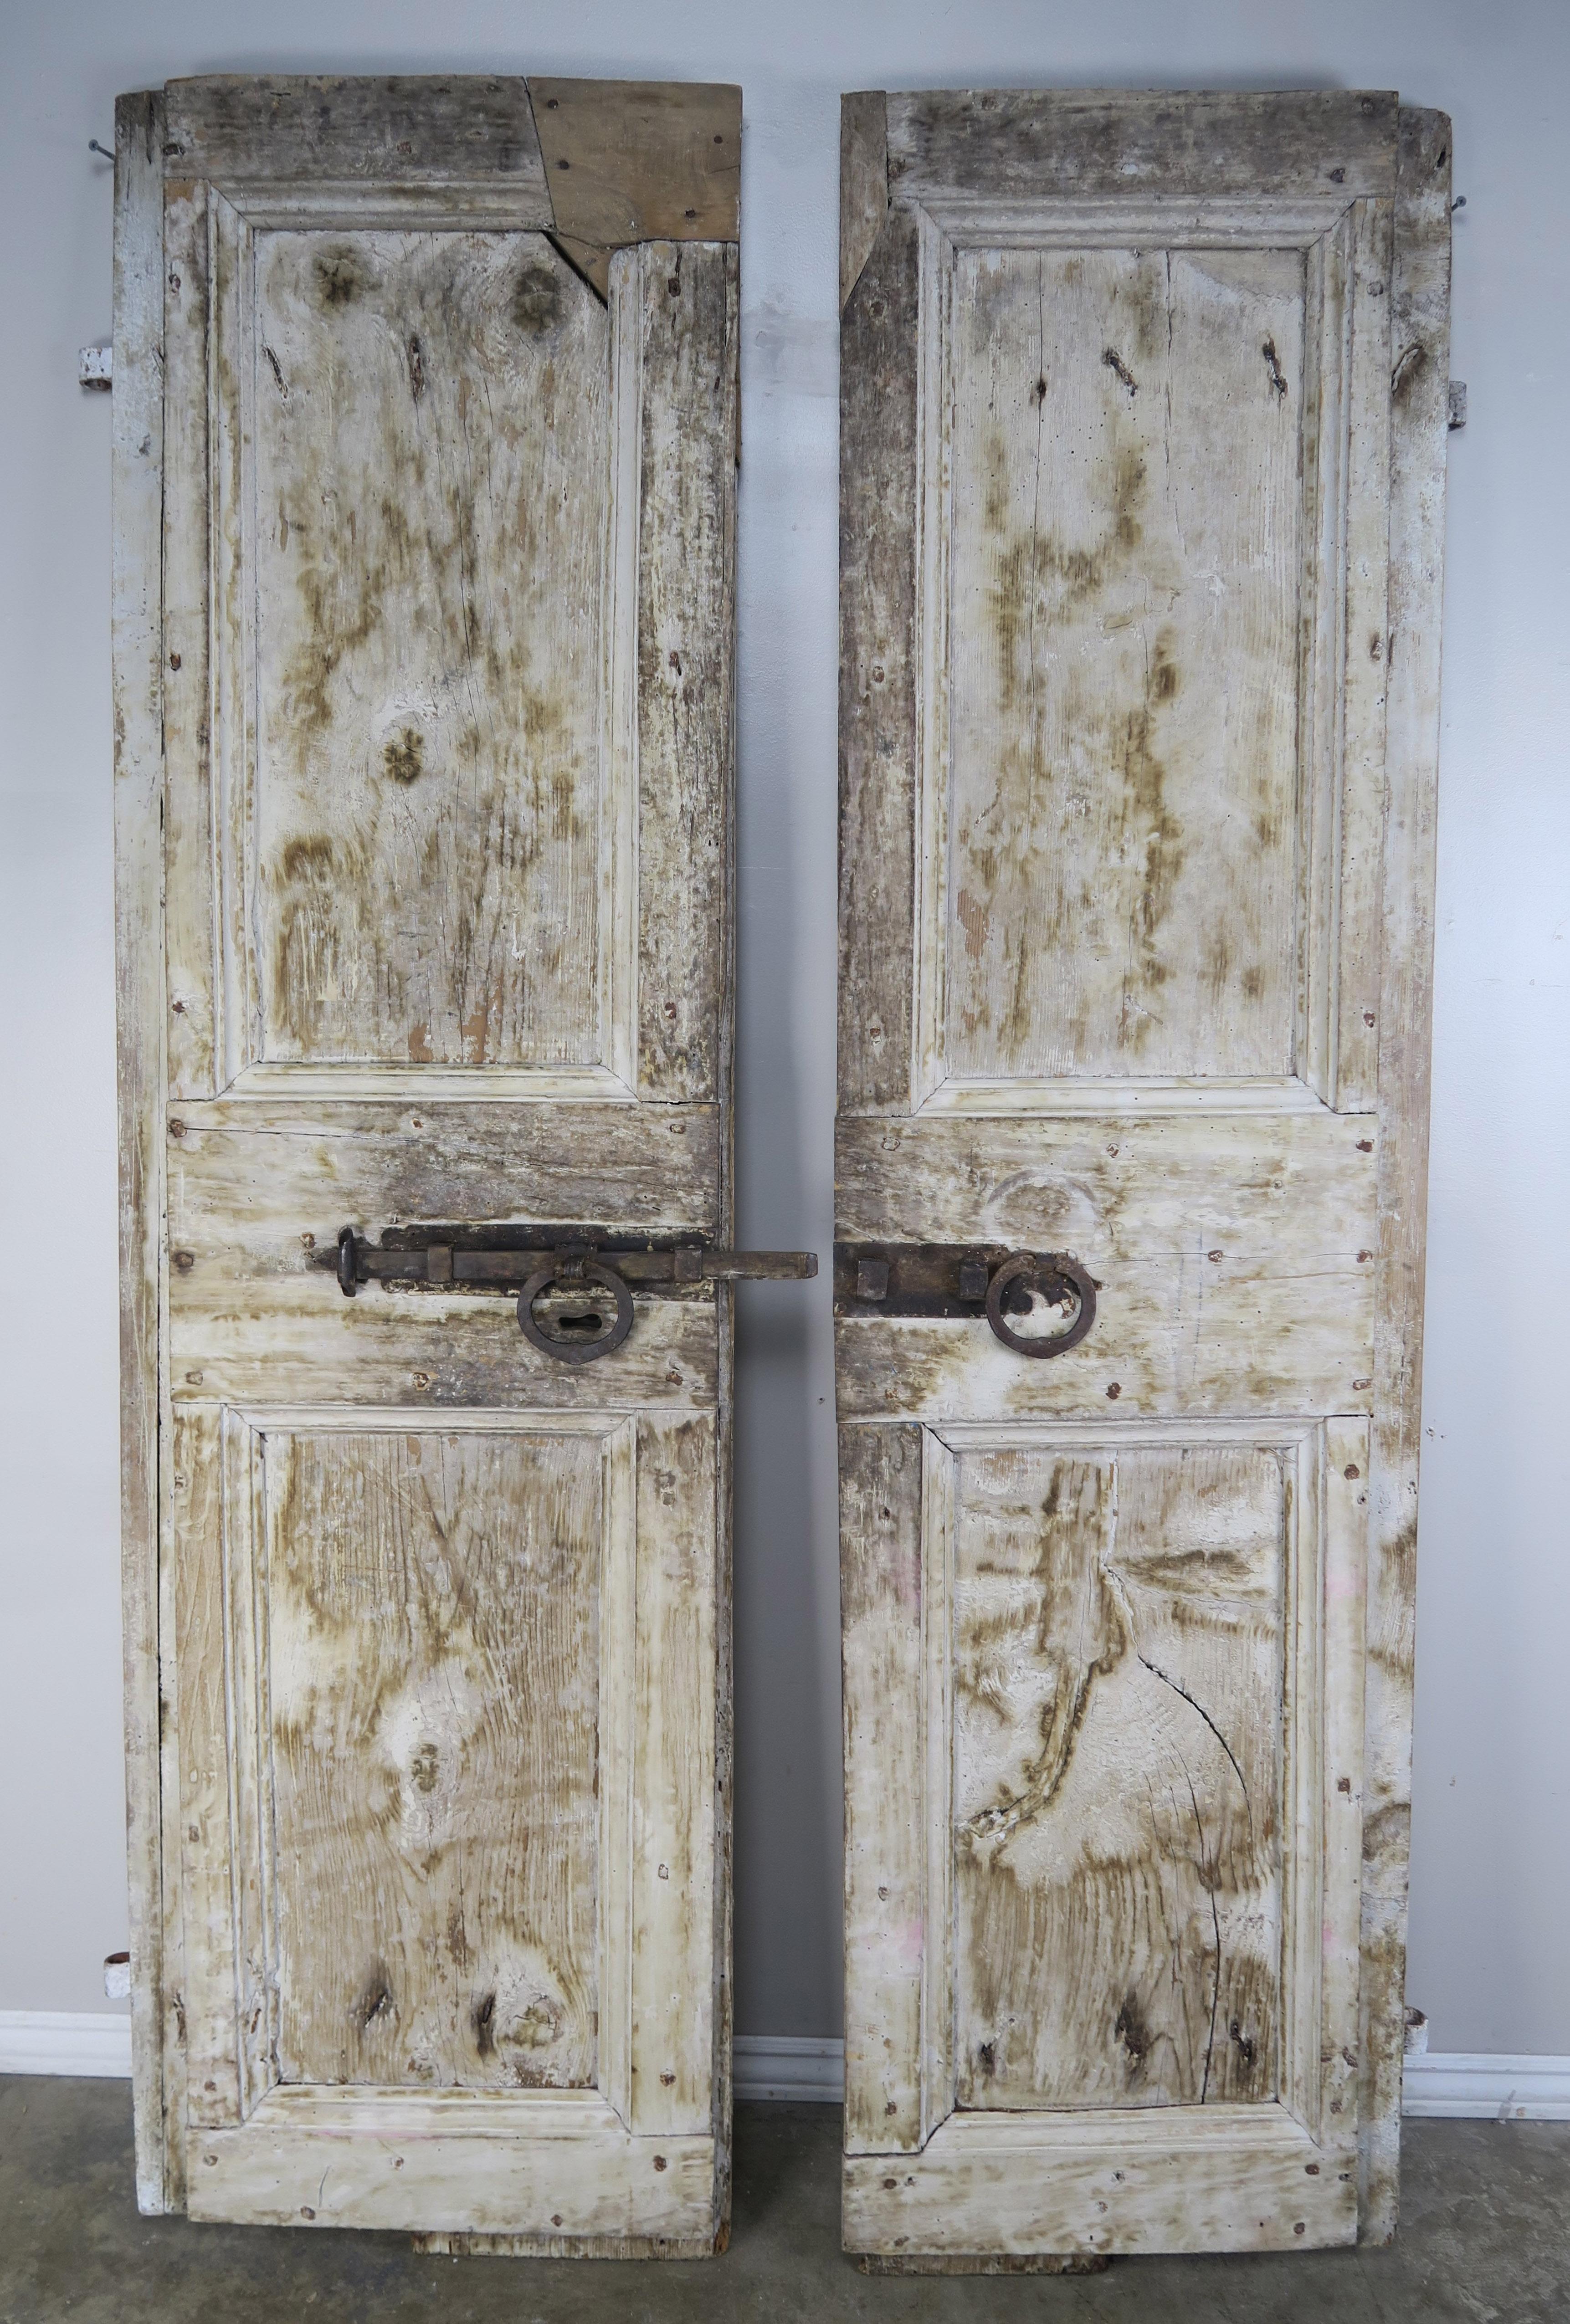 Pair of rustic Swedish distressed white painted doors with original heavy wrought iron hardware. Beautiful distressed finish with wood exposed underneath.